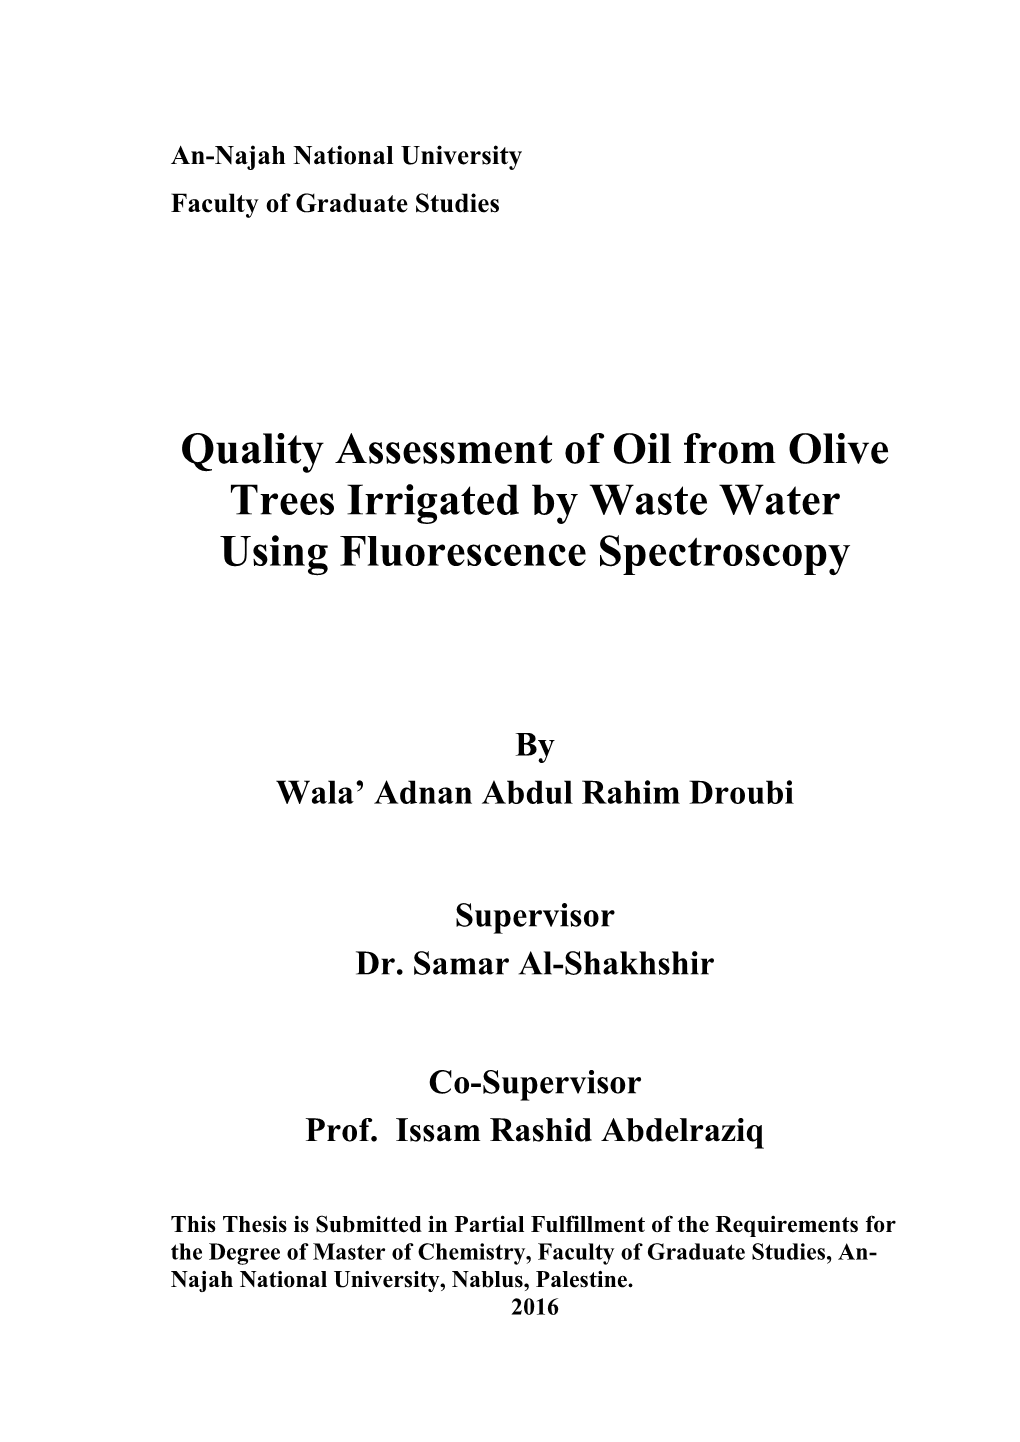 Quality Assessment of Oil from Olive Trees Irrigated by Waste Water Using Fluorescence Spectroscopy